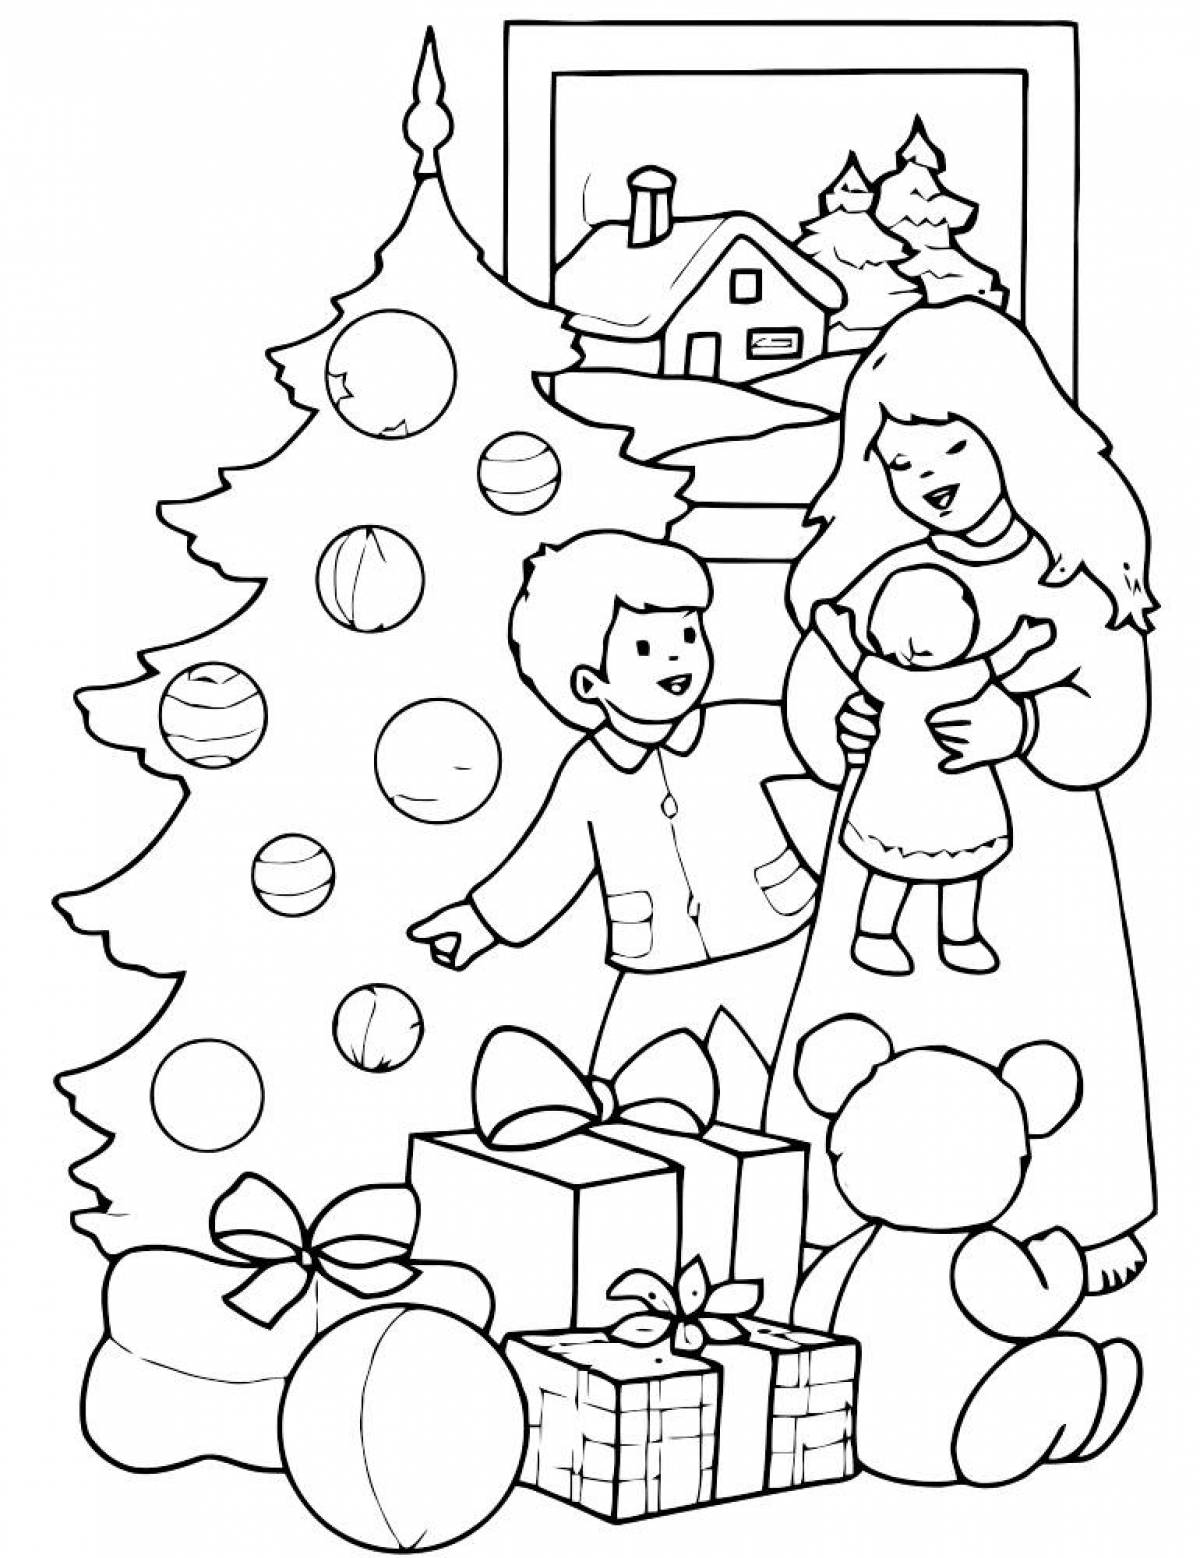 Sparkling Christmas coloring book for kids 6-7 years old